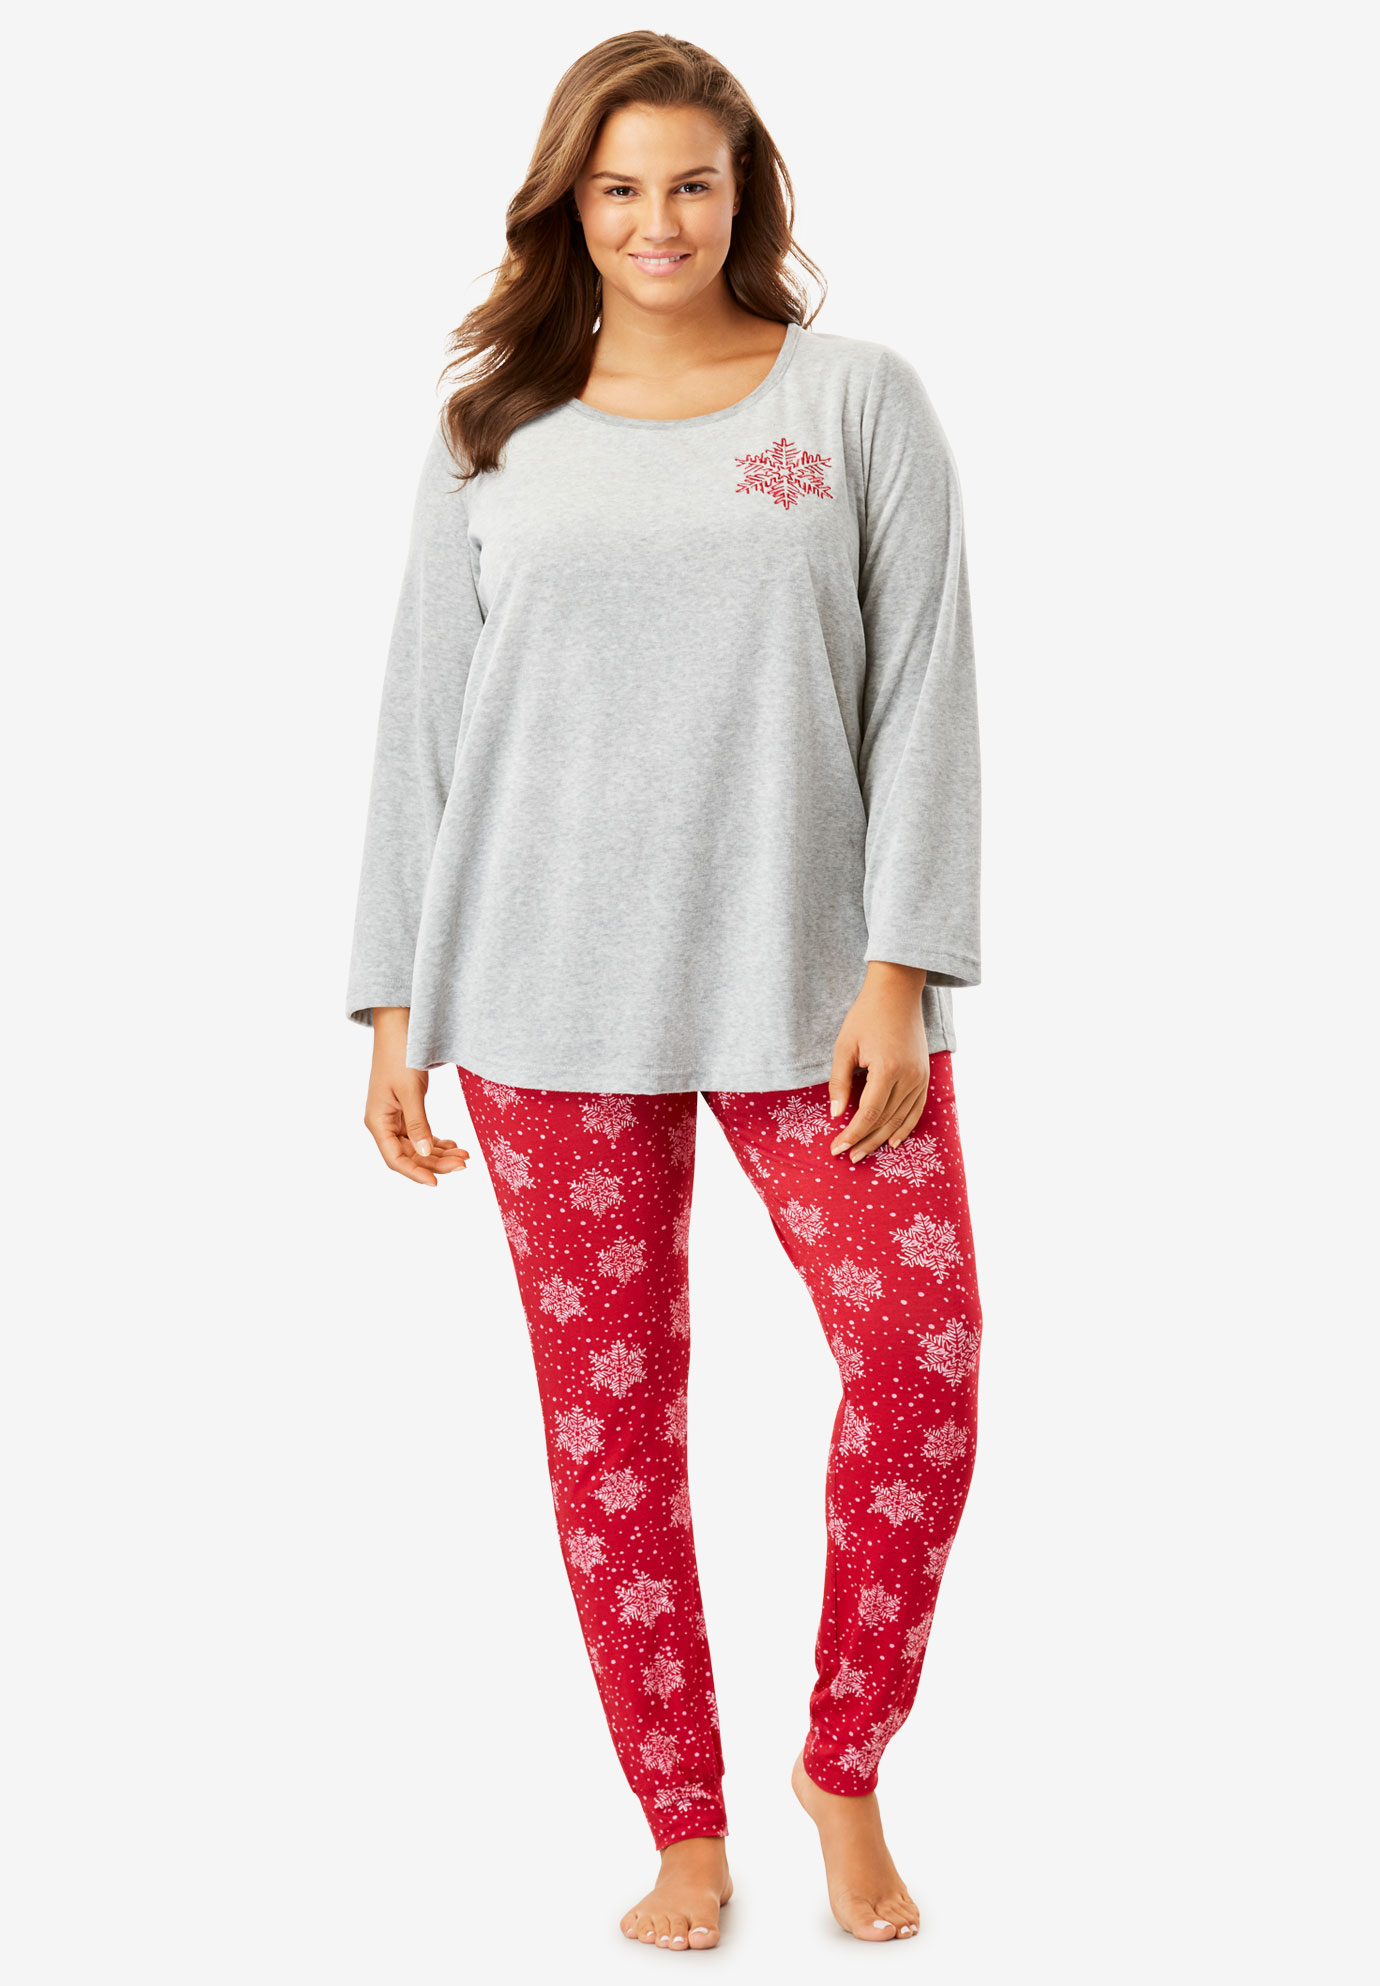 Embroidered Velour Pajama Set by Dreams & Co.®| Plus Size Sleep | Woman Within